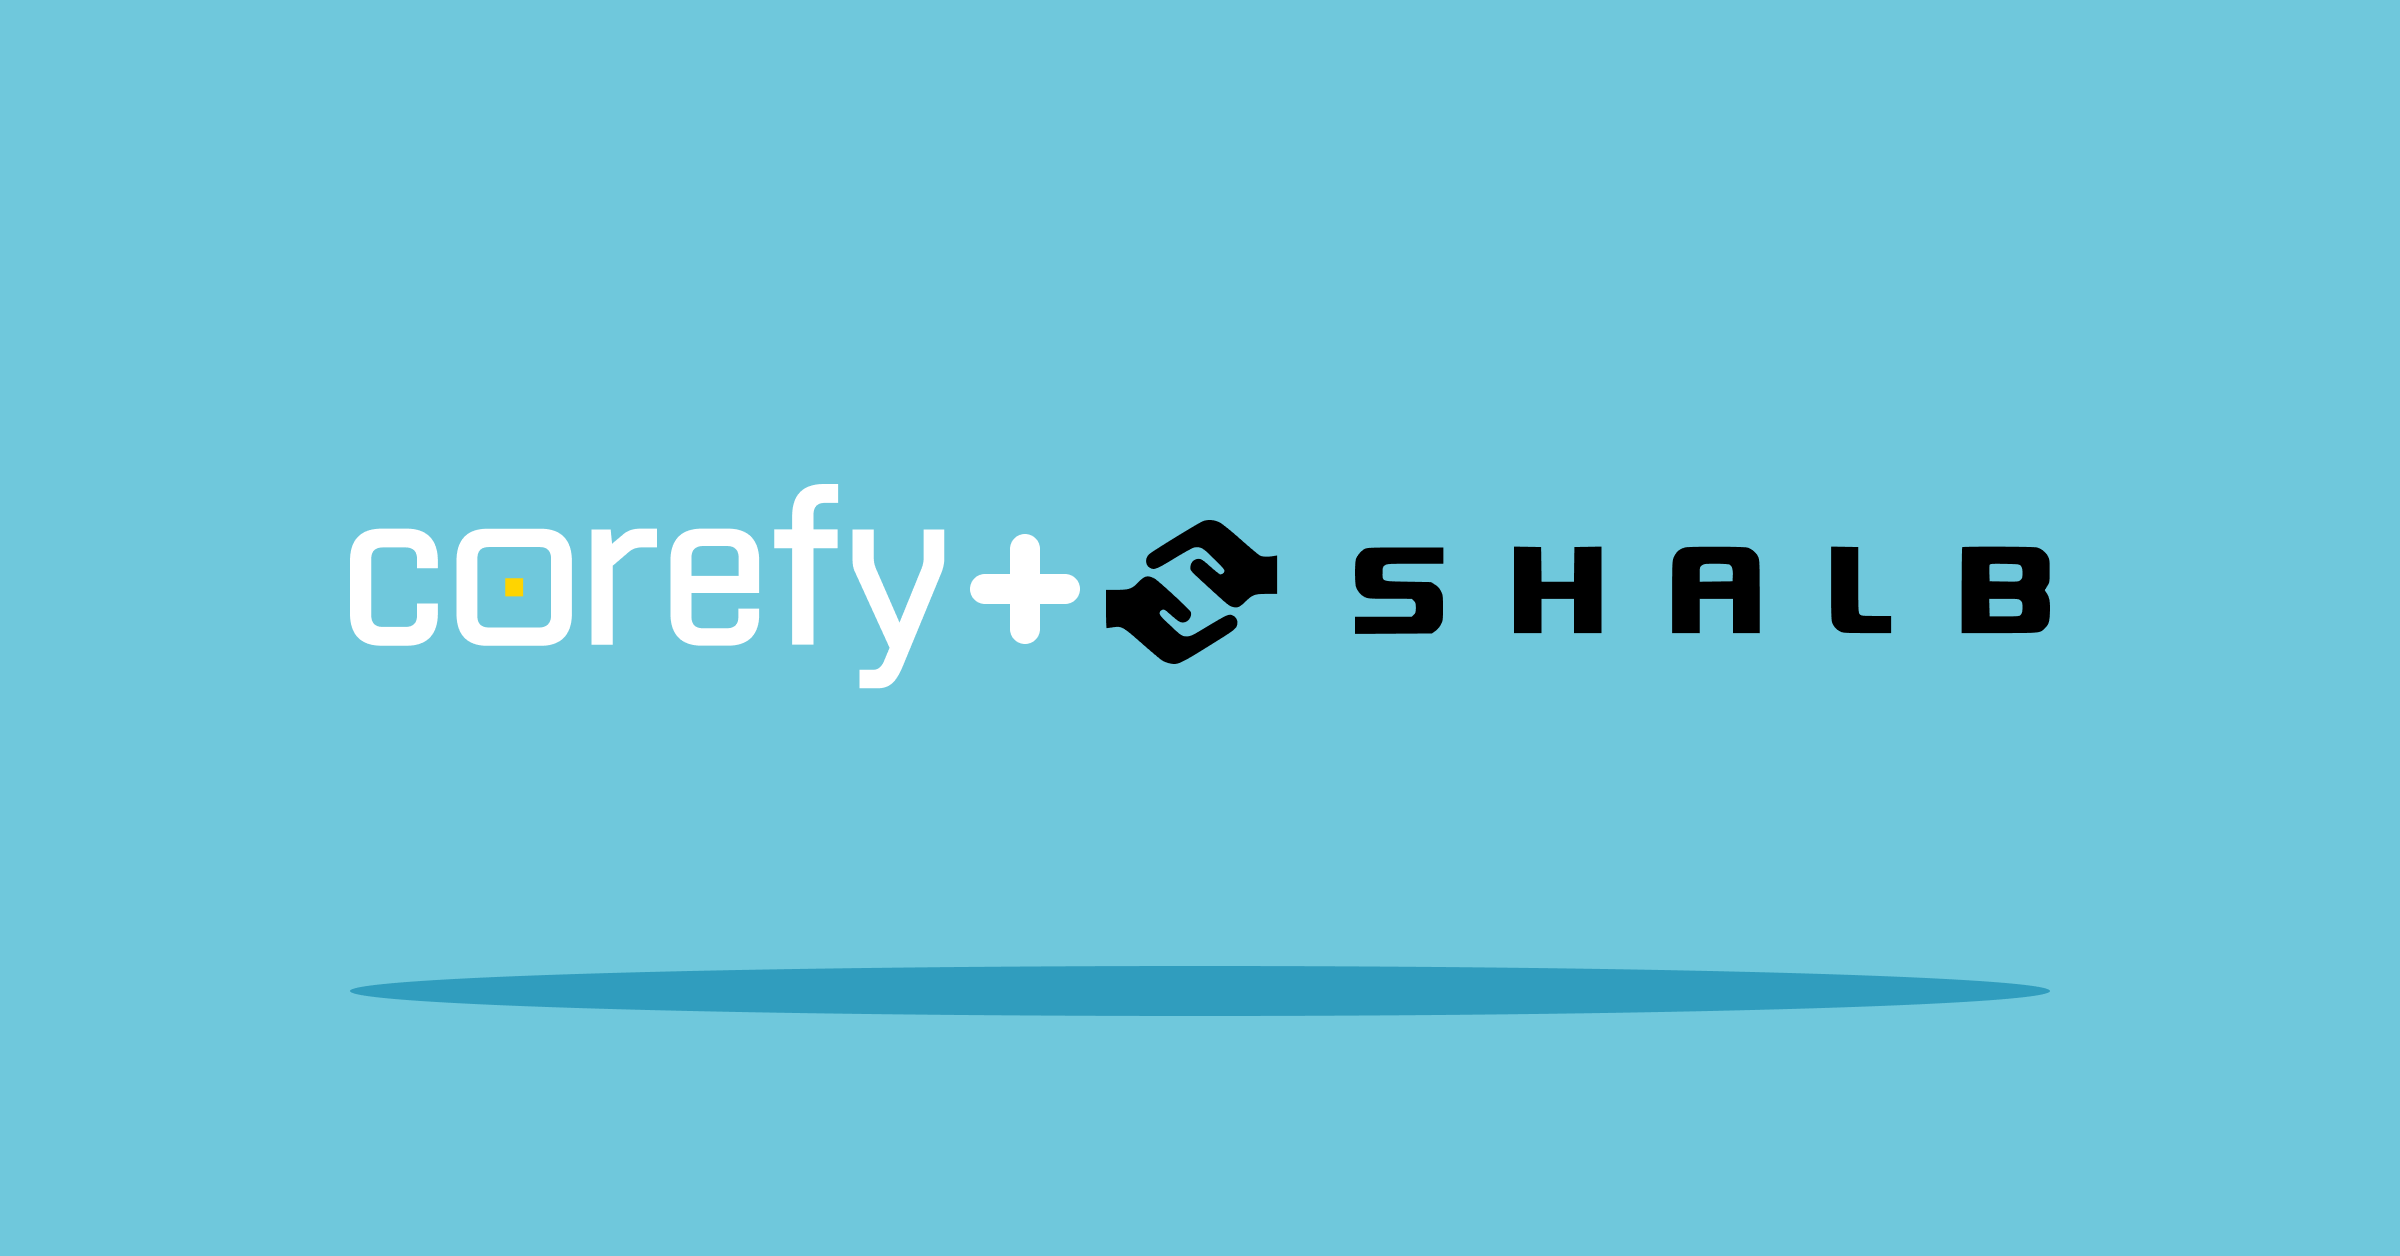 Corefy partnered with SHALB for infrastructure improvements